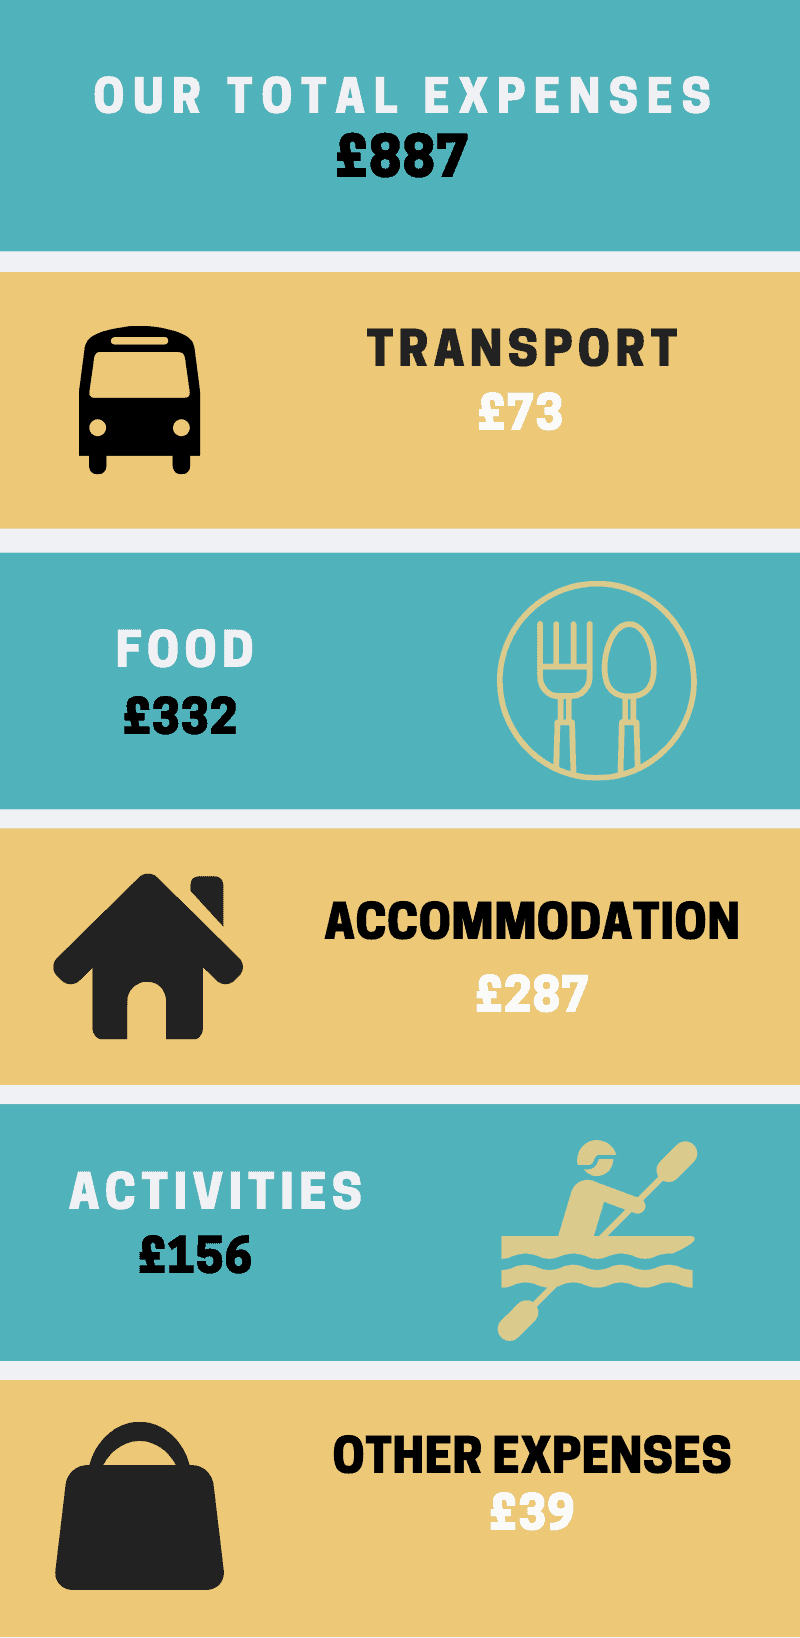 An infographic showing our expenses for travelling through Bali